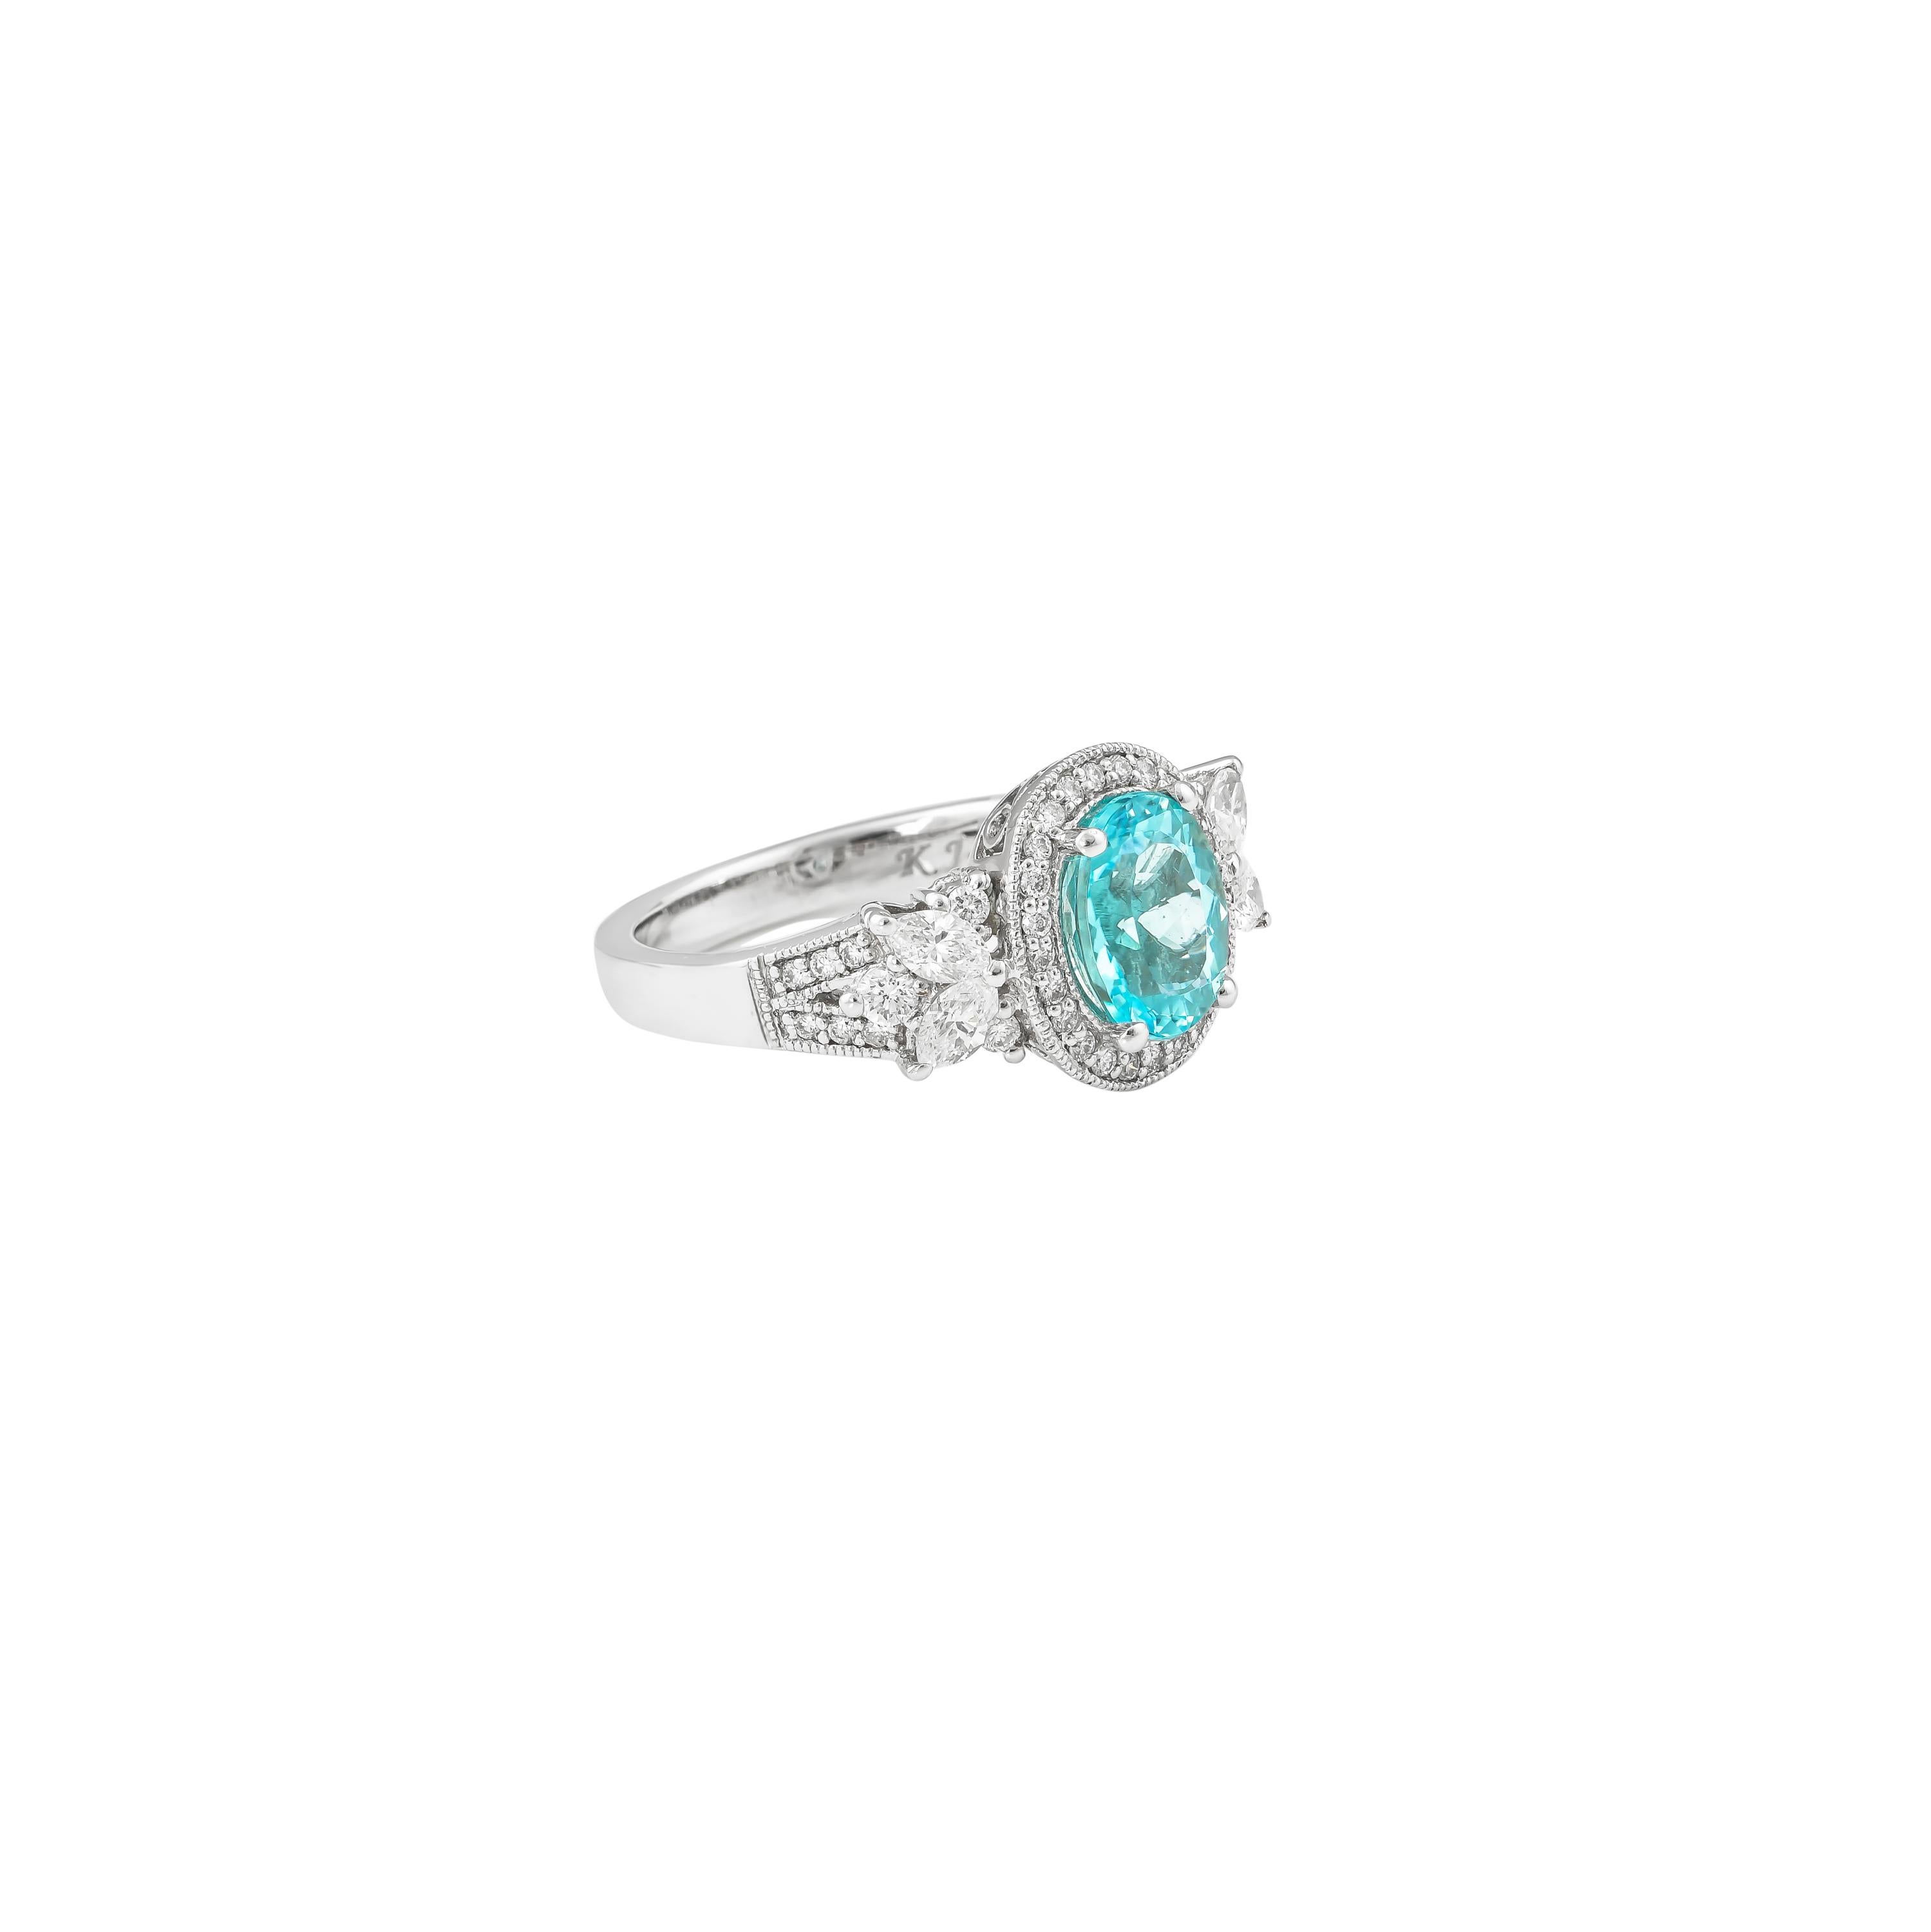 This collection features a selection of the most precious paraibas. This enchanting gemstone is a type of tourmaline sourced from Mozambique and has a beautiful pastel blue-green hue. We have accented this gorgeous gemstone with diamonds set in